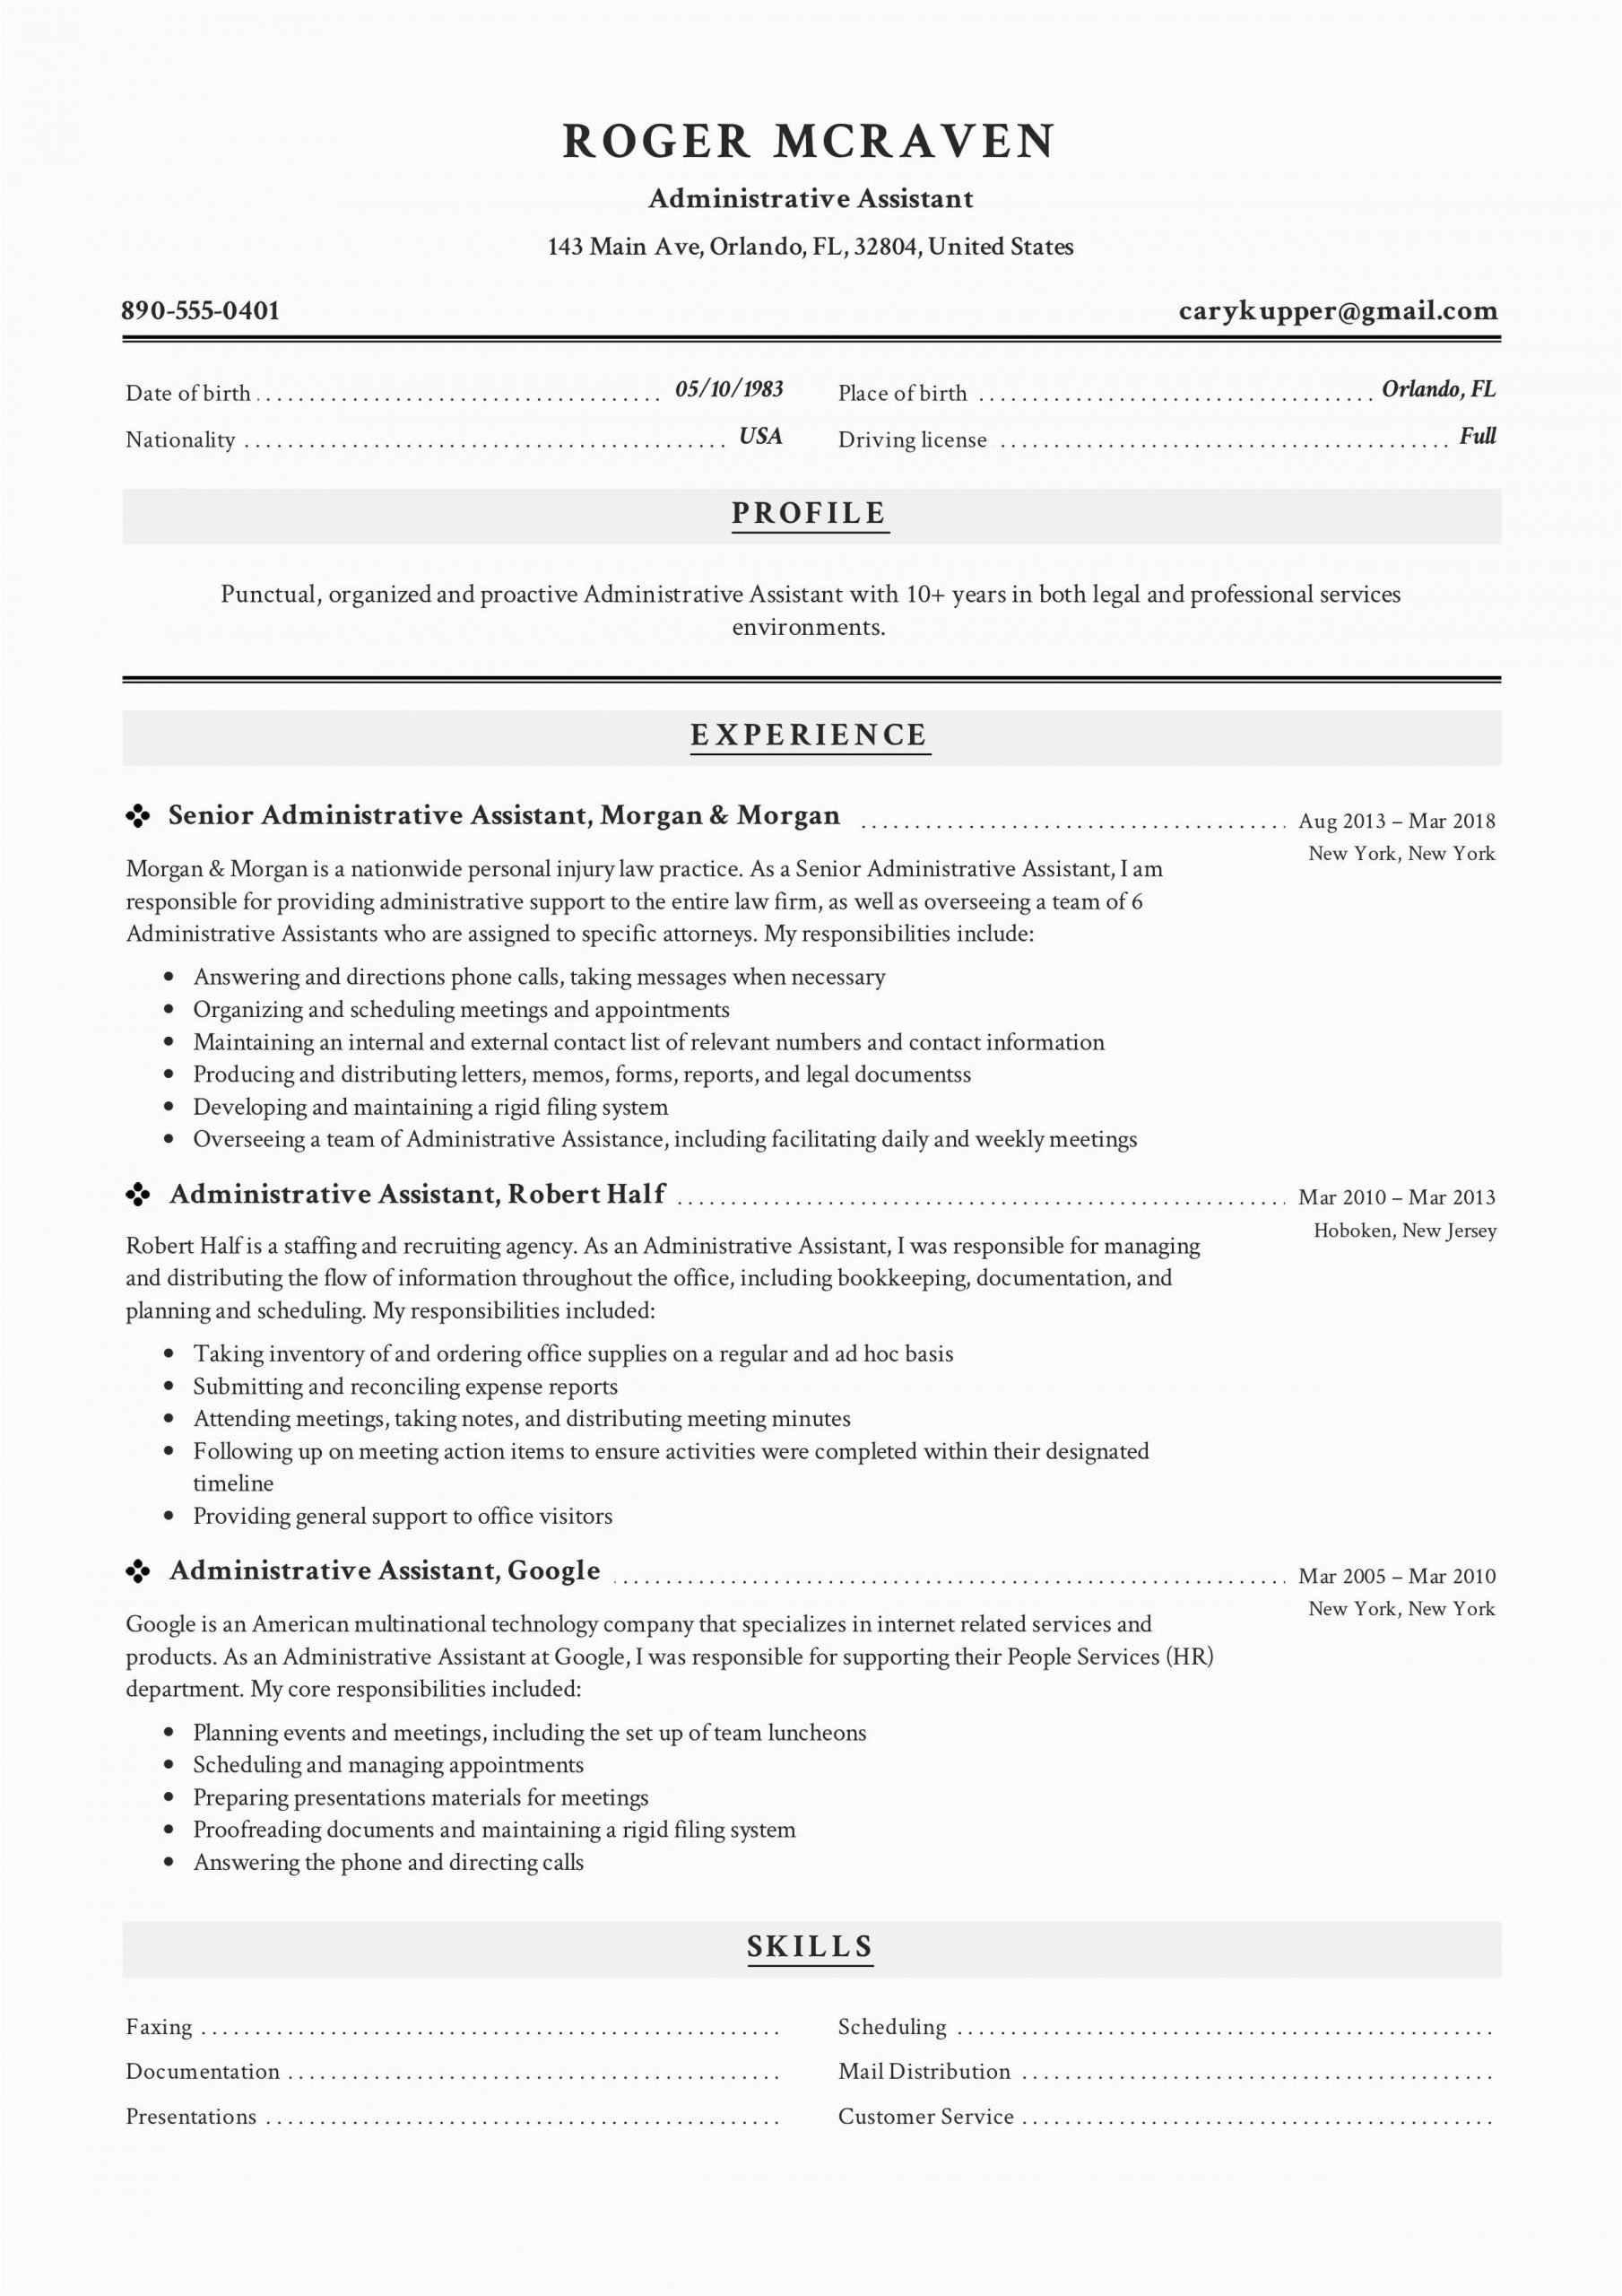 Summary Of Qualifications Sample Resume for Administrative assistant Free Administrative assistant Resume Sample Template